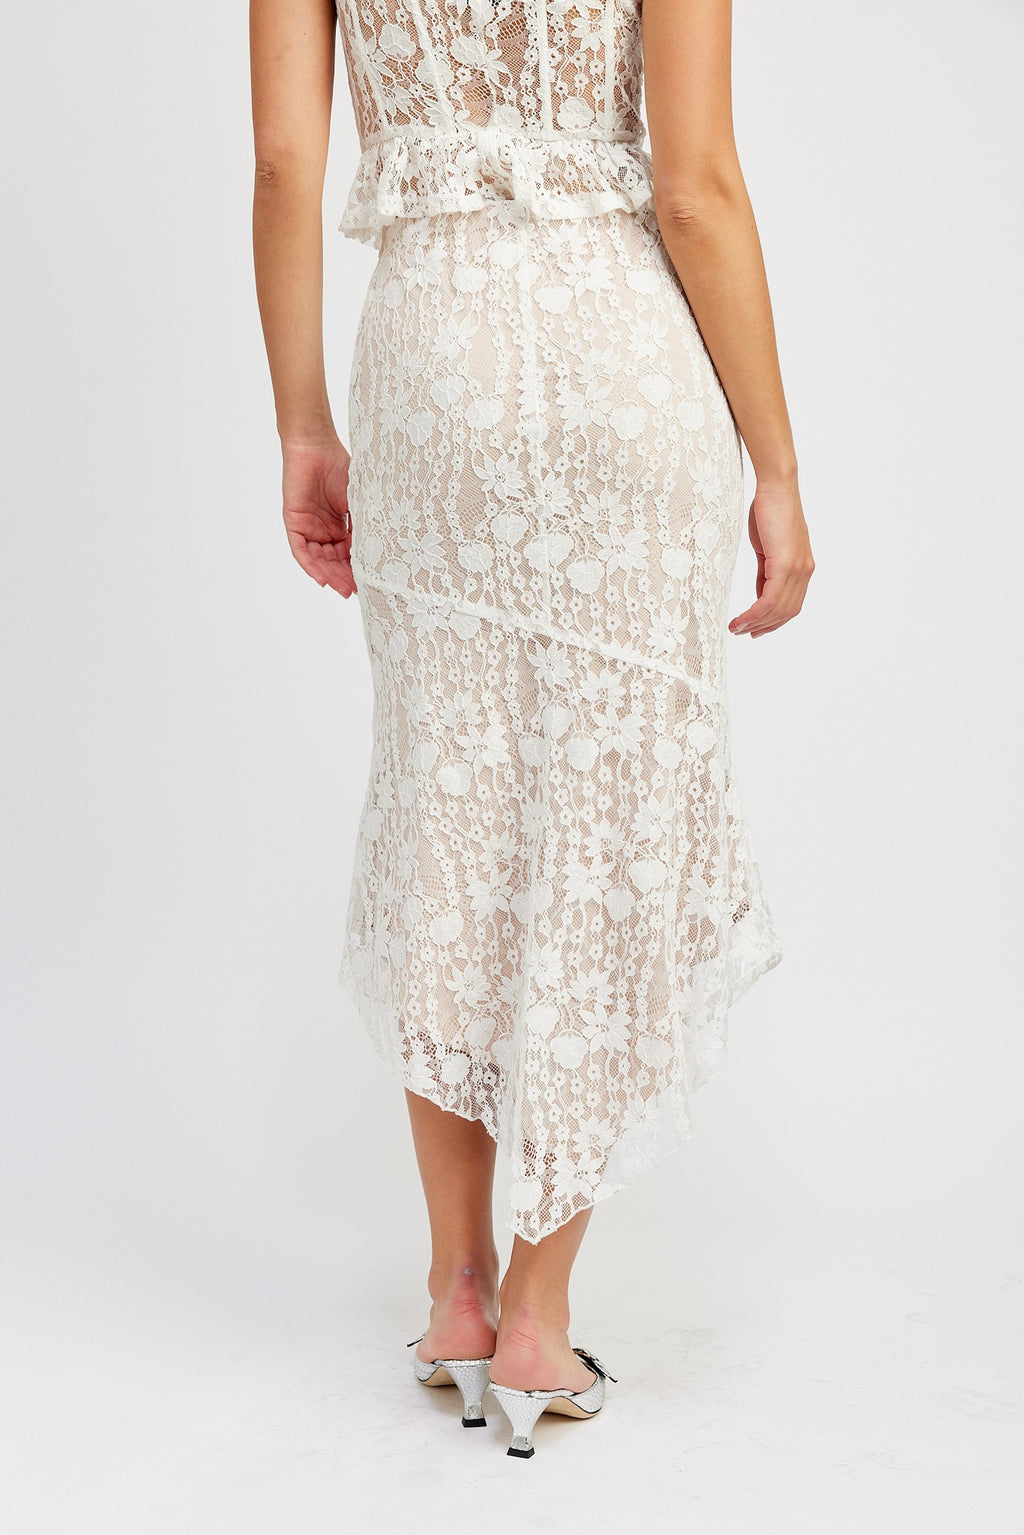 LACE MAXI SKIRT (set sold separately)